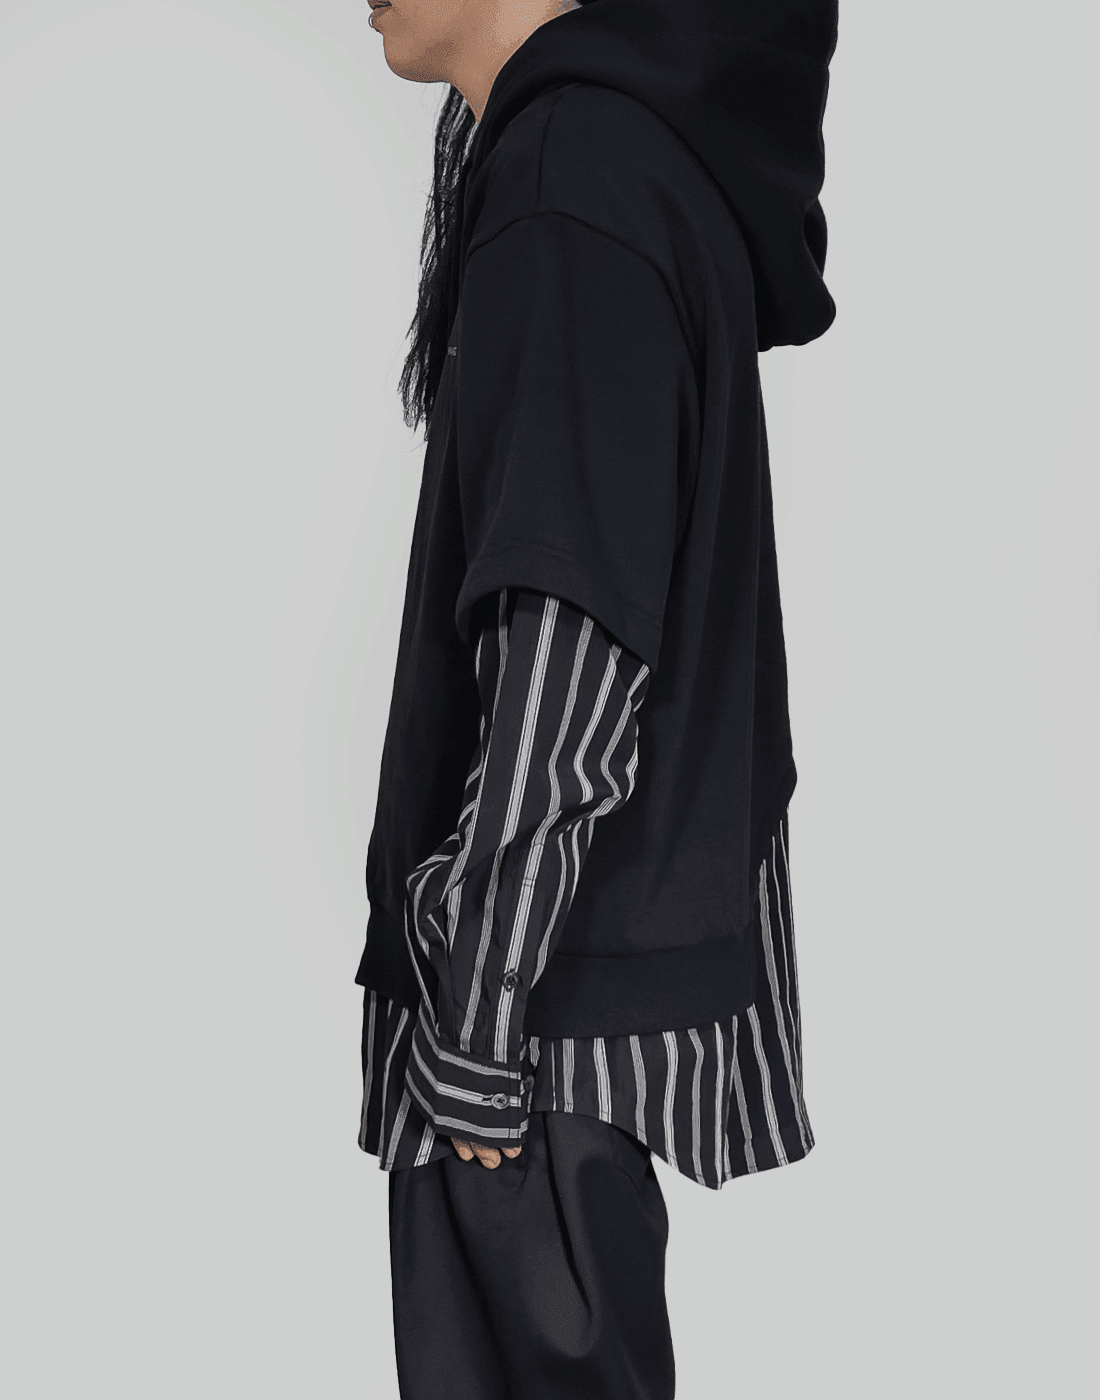 FENG CHEN WANG SHIRTING PANELLED HOODIE - 082plus